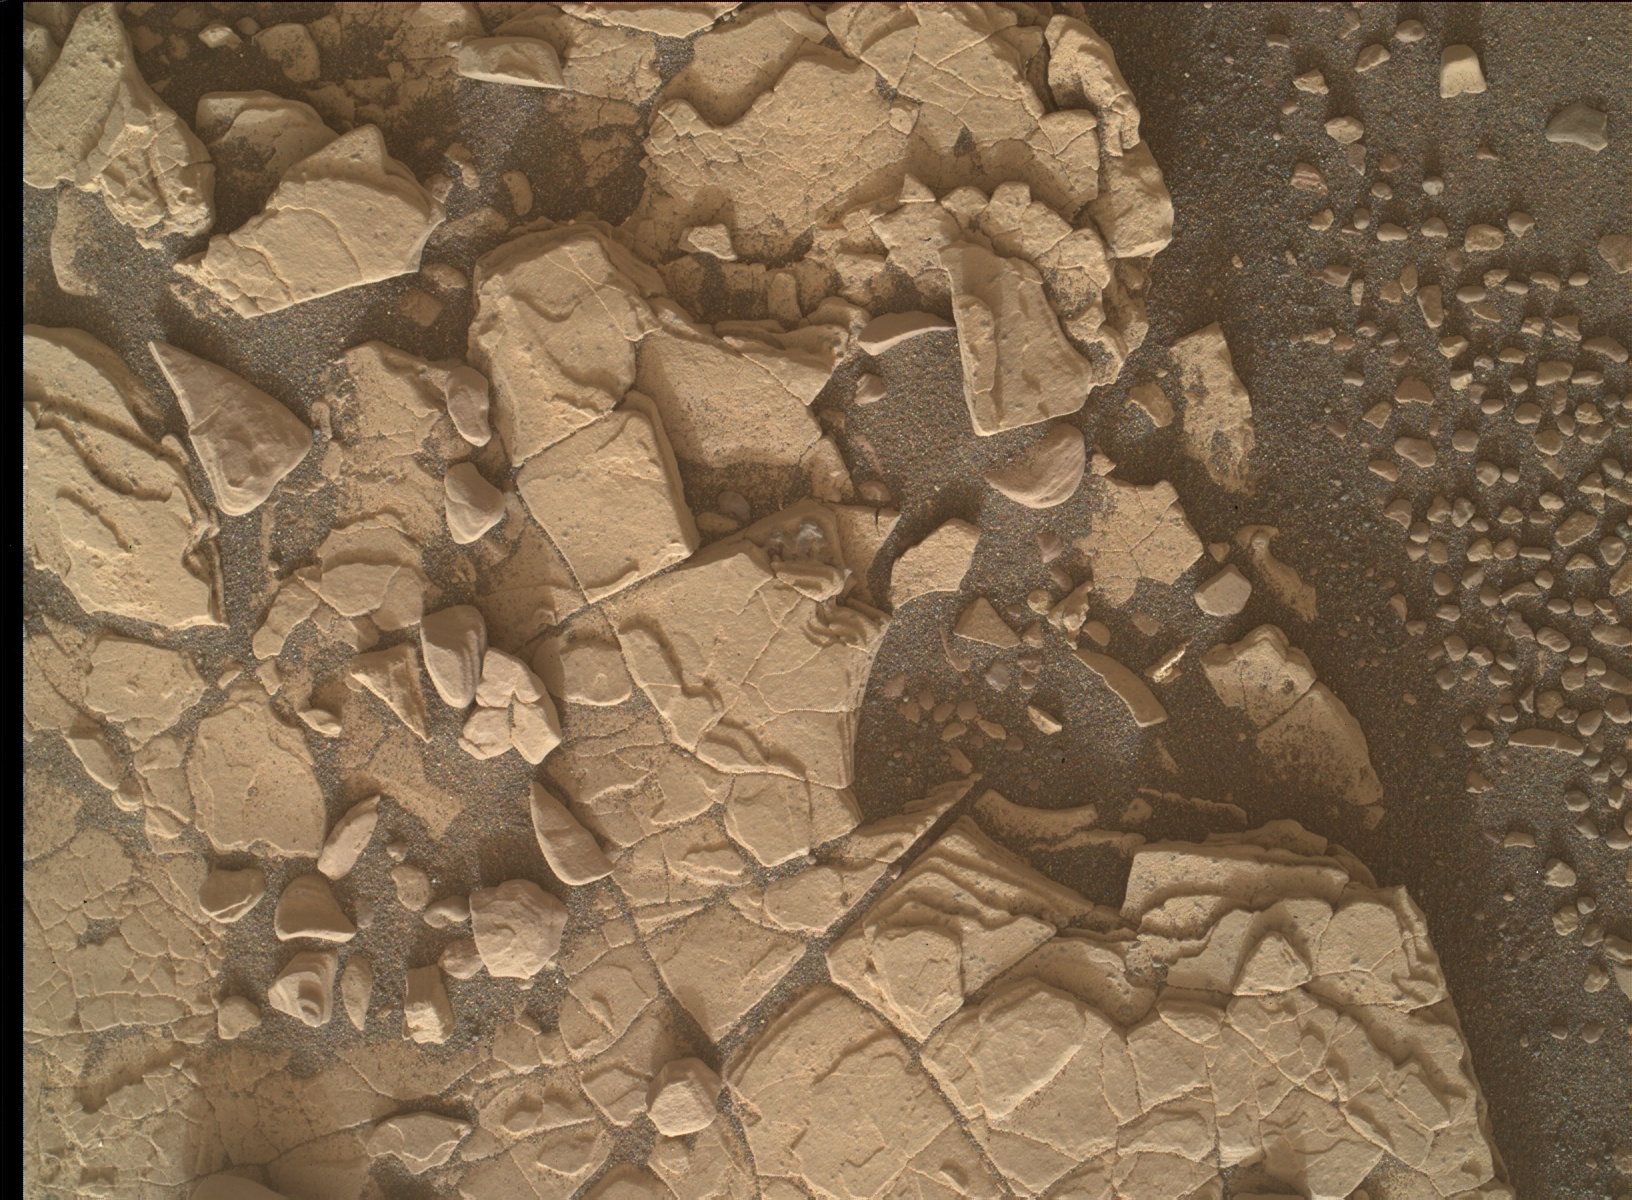 Nasa's Mars rover Curiosity acquired this image using its Mars Hand Lens Imager (MAHLI) on Sol 2862, at drive 2176, site number 82